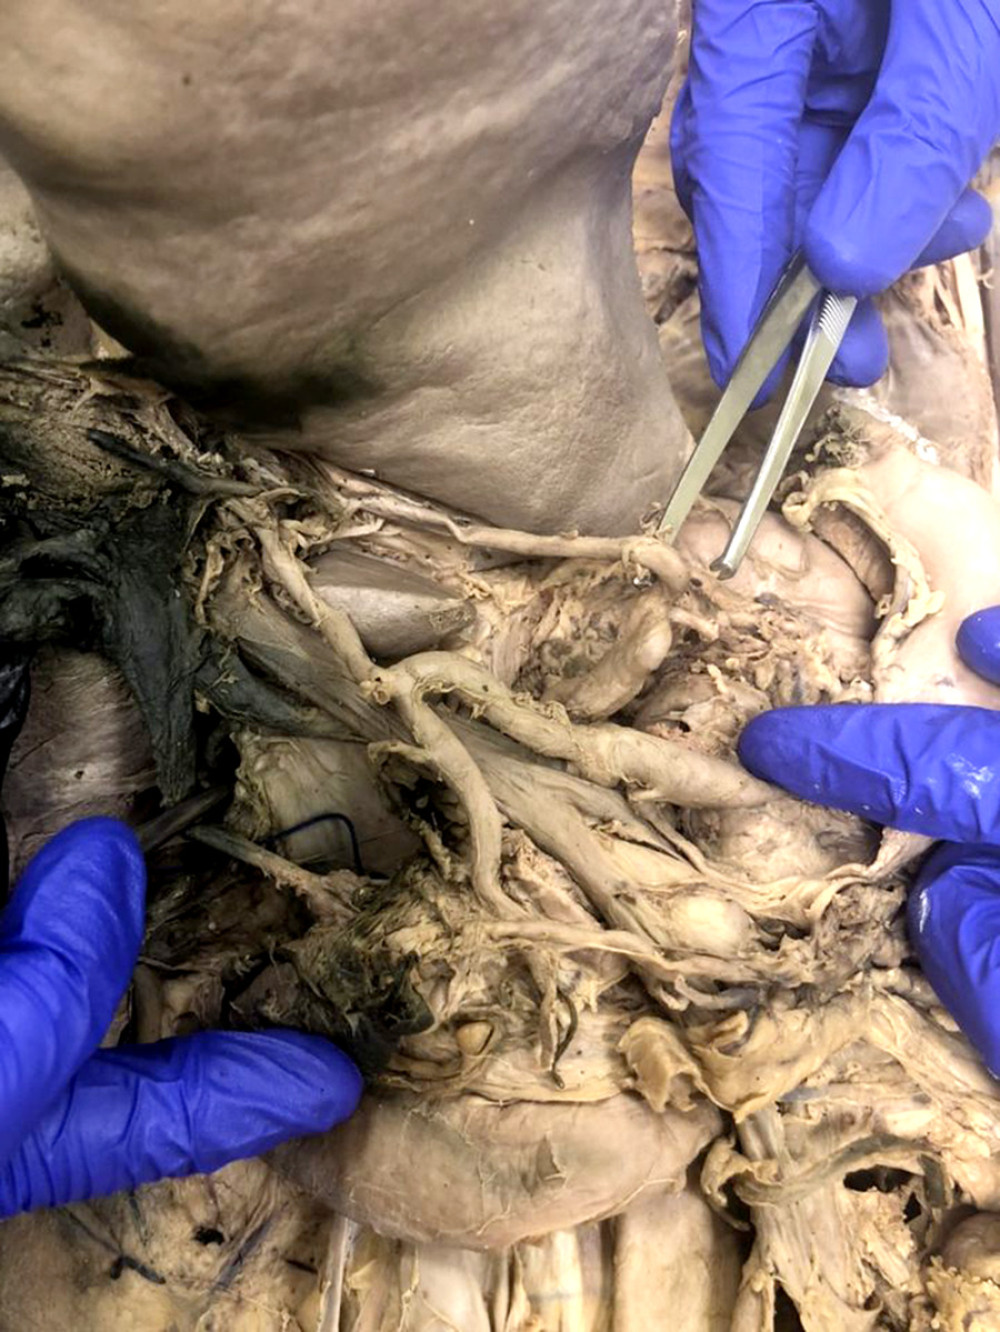 The three anomalous hepatic arteries can be seen branching directly off the the celiac trunk and inserting into the liver in this photograph. In this view, the portal vein and biliary tree are present to highlight the anomalous vasculature relative to local anatomic structures.